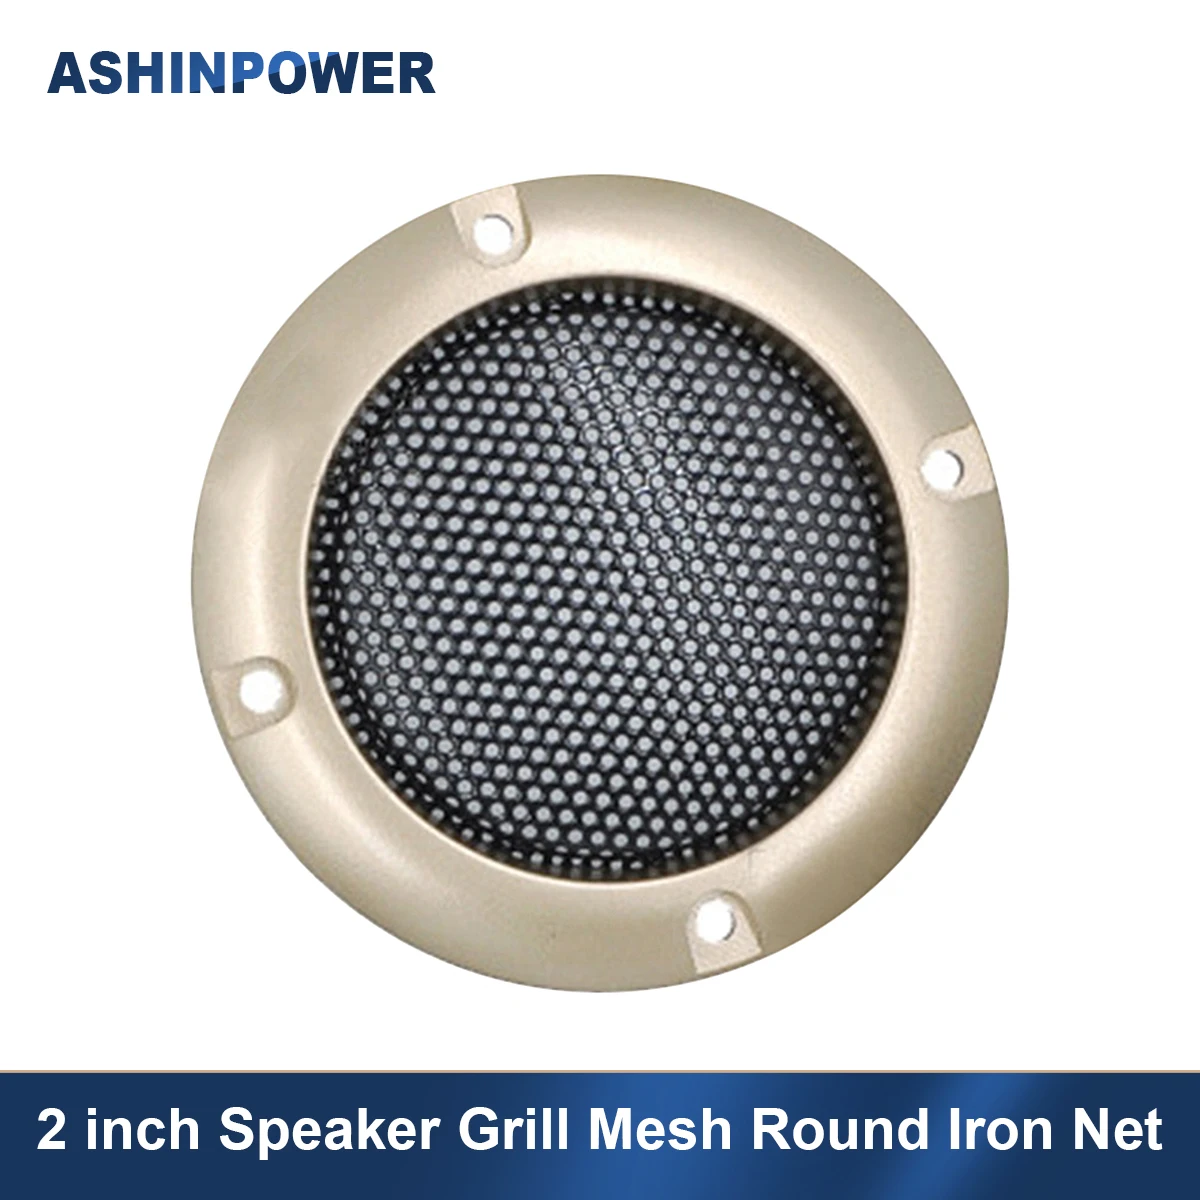 

2 inch Speaker Grill Mesh Round Iron Net Car Tweeter Subwoofer Horn Protective Cover Circle Enclosure Protection Net